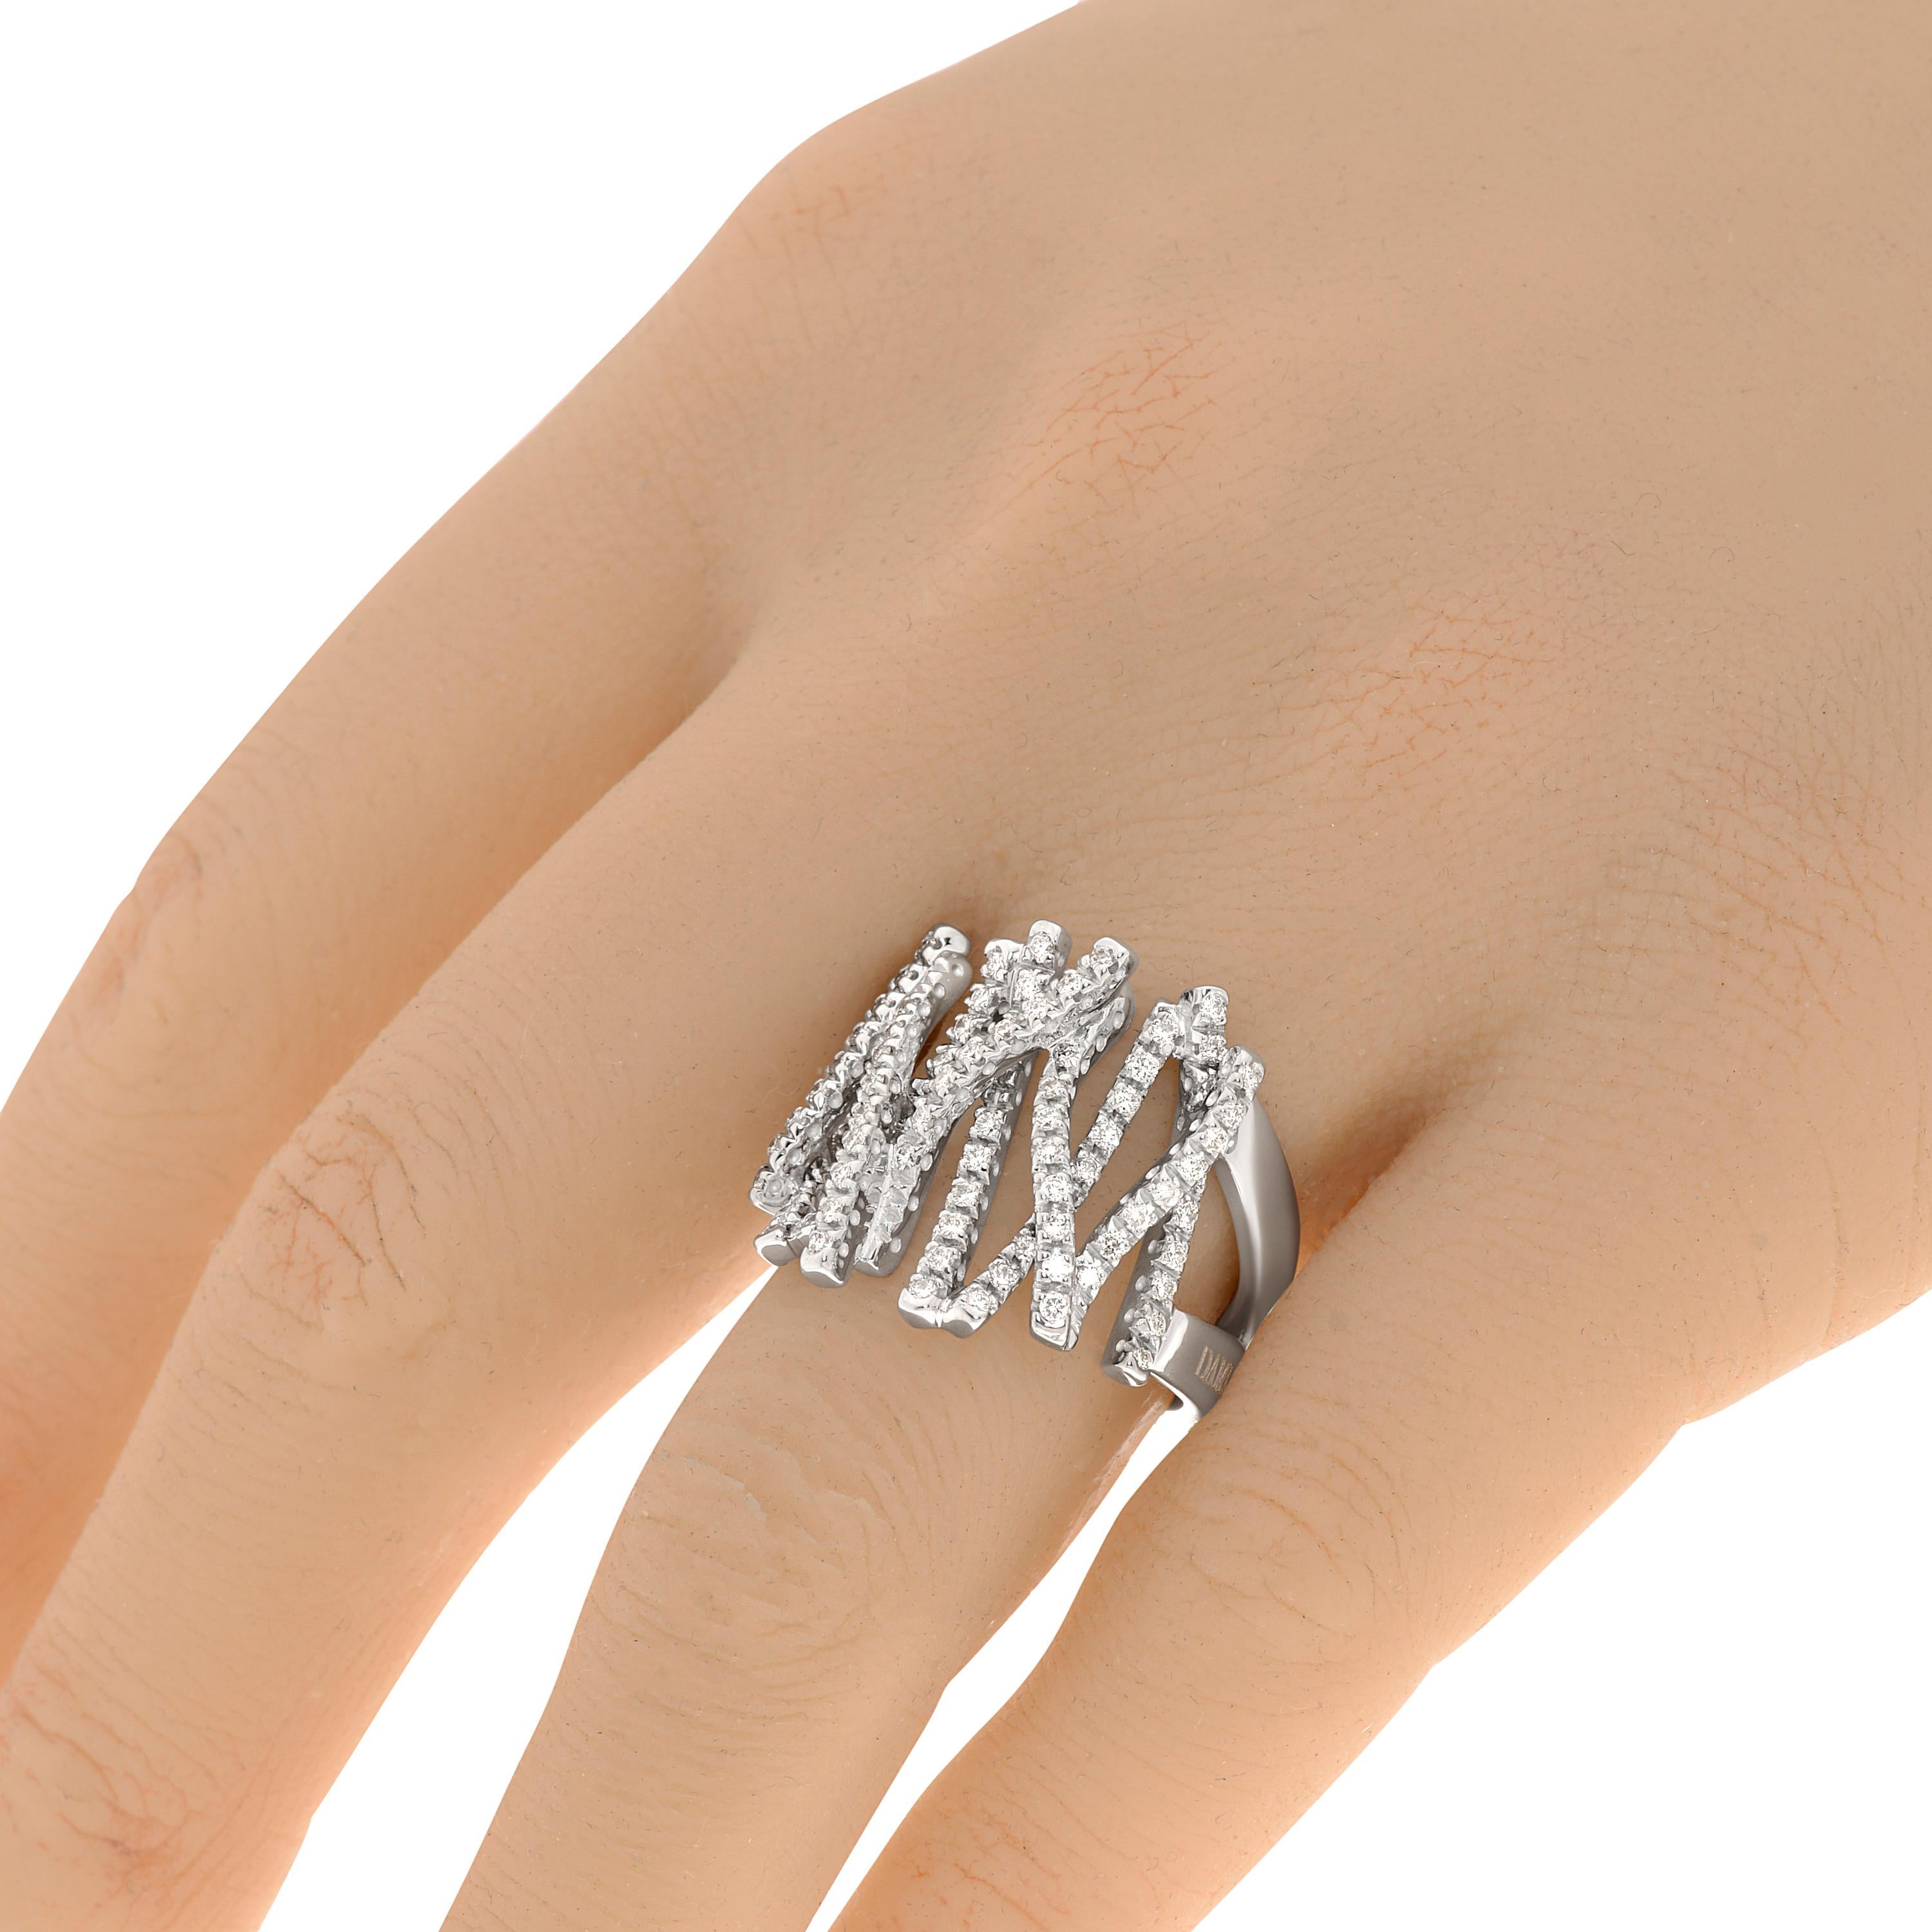 Damiani 18k white gold statement ring features 0.84ct. tw. diamond with color and clarity: FG, VVS/VS. The band width is 1/4